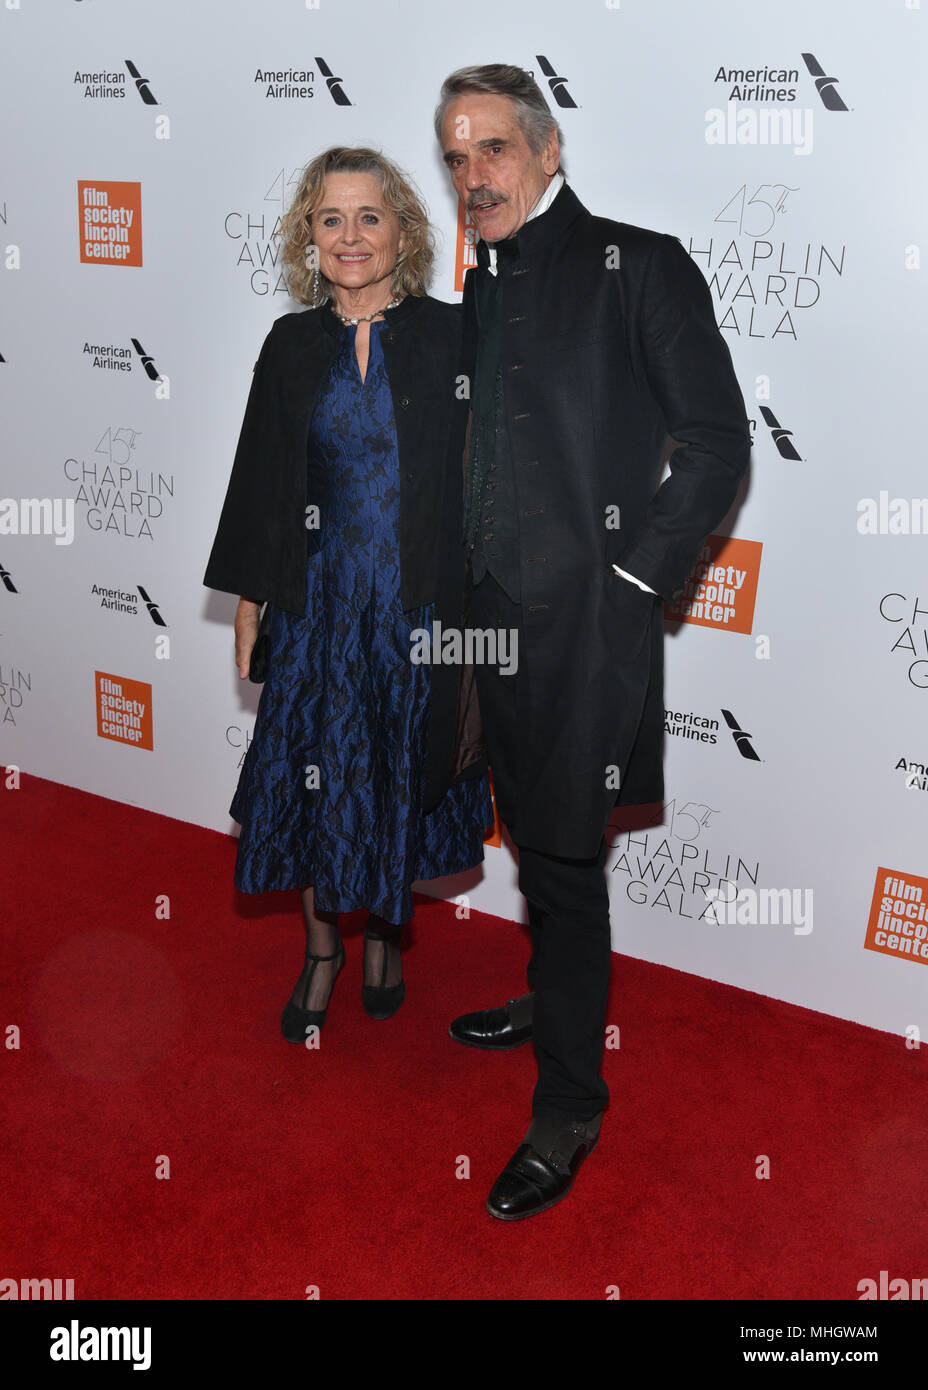 Sinead Cusack and Jeremy Irons attend the 45th Chaplin Award Gala at Alice Tully Hall, Lincoln Center on April 30, 2018 in New York City. Stock Photo